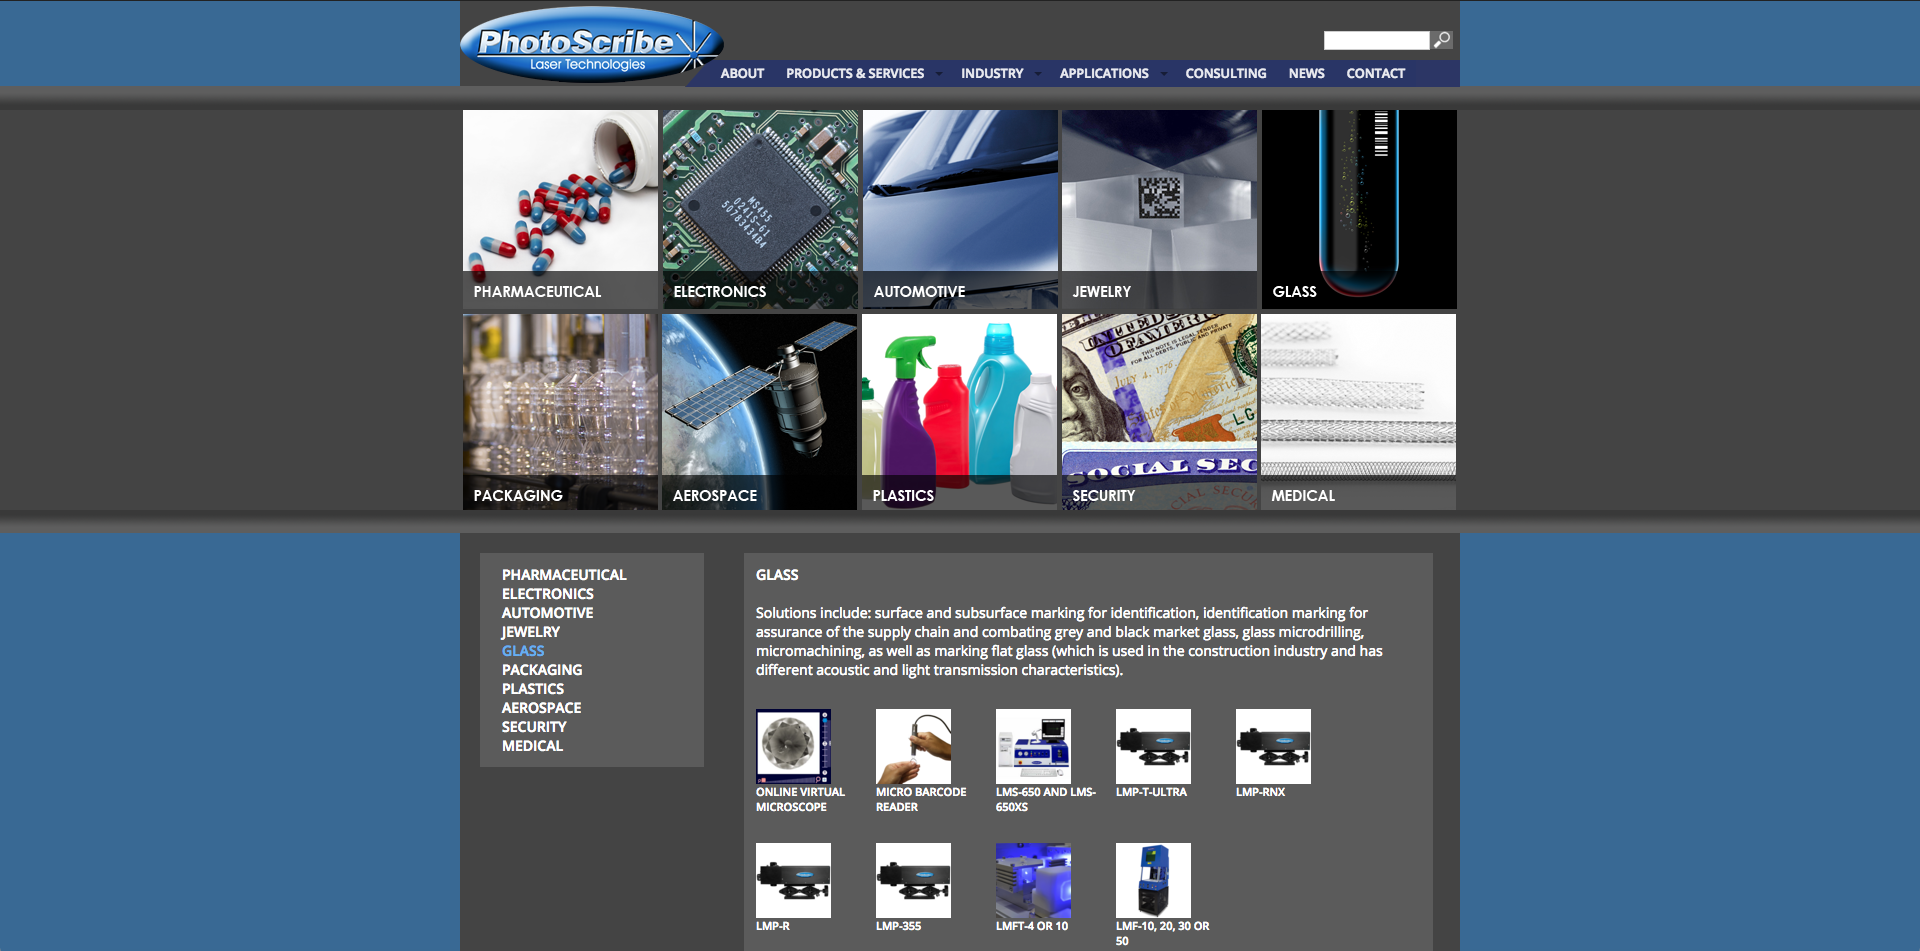 PhotoScribe website, Industry Page